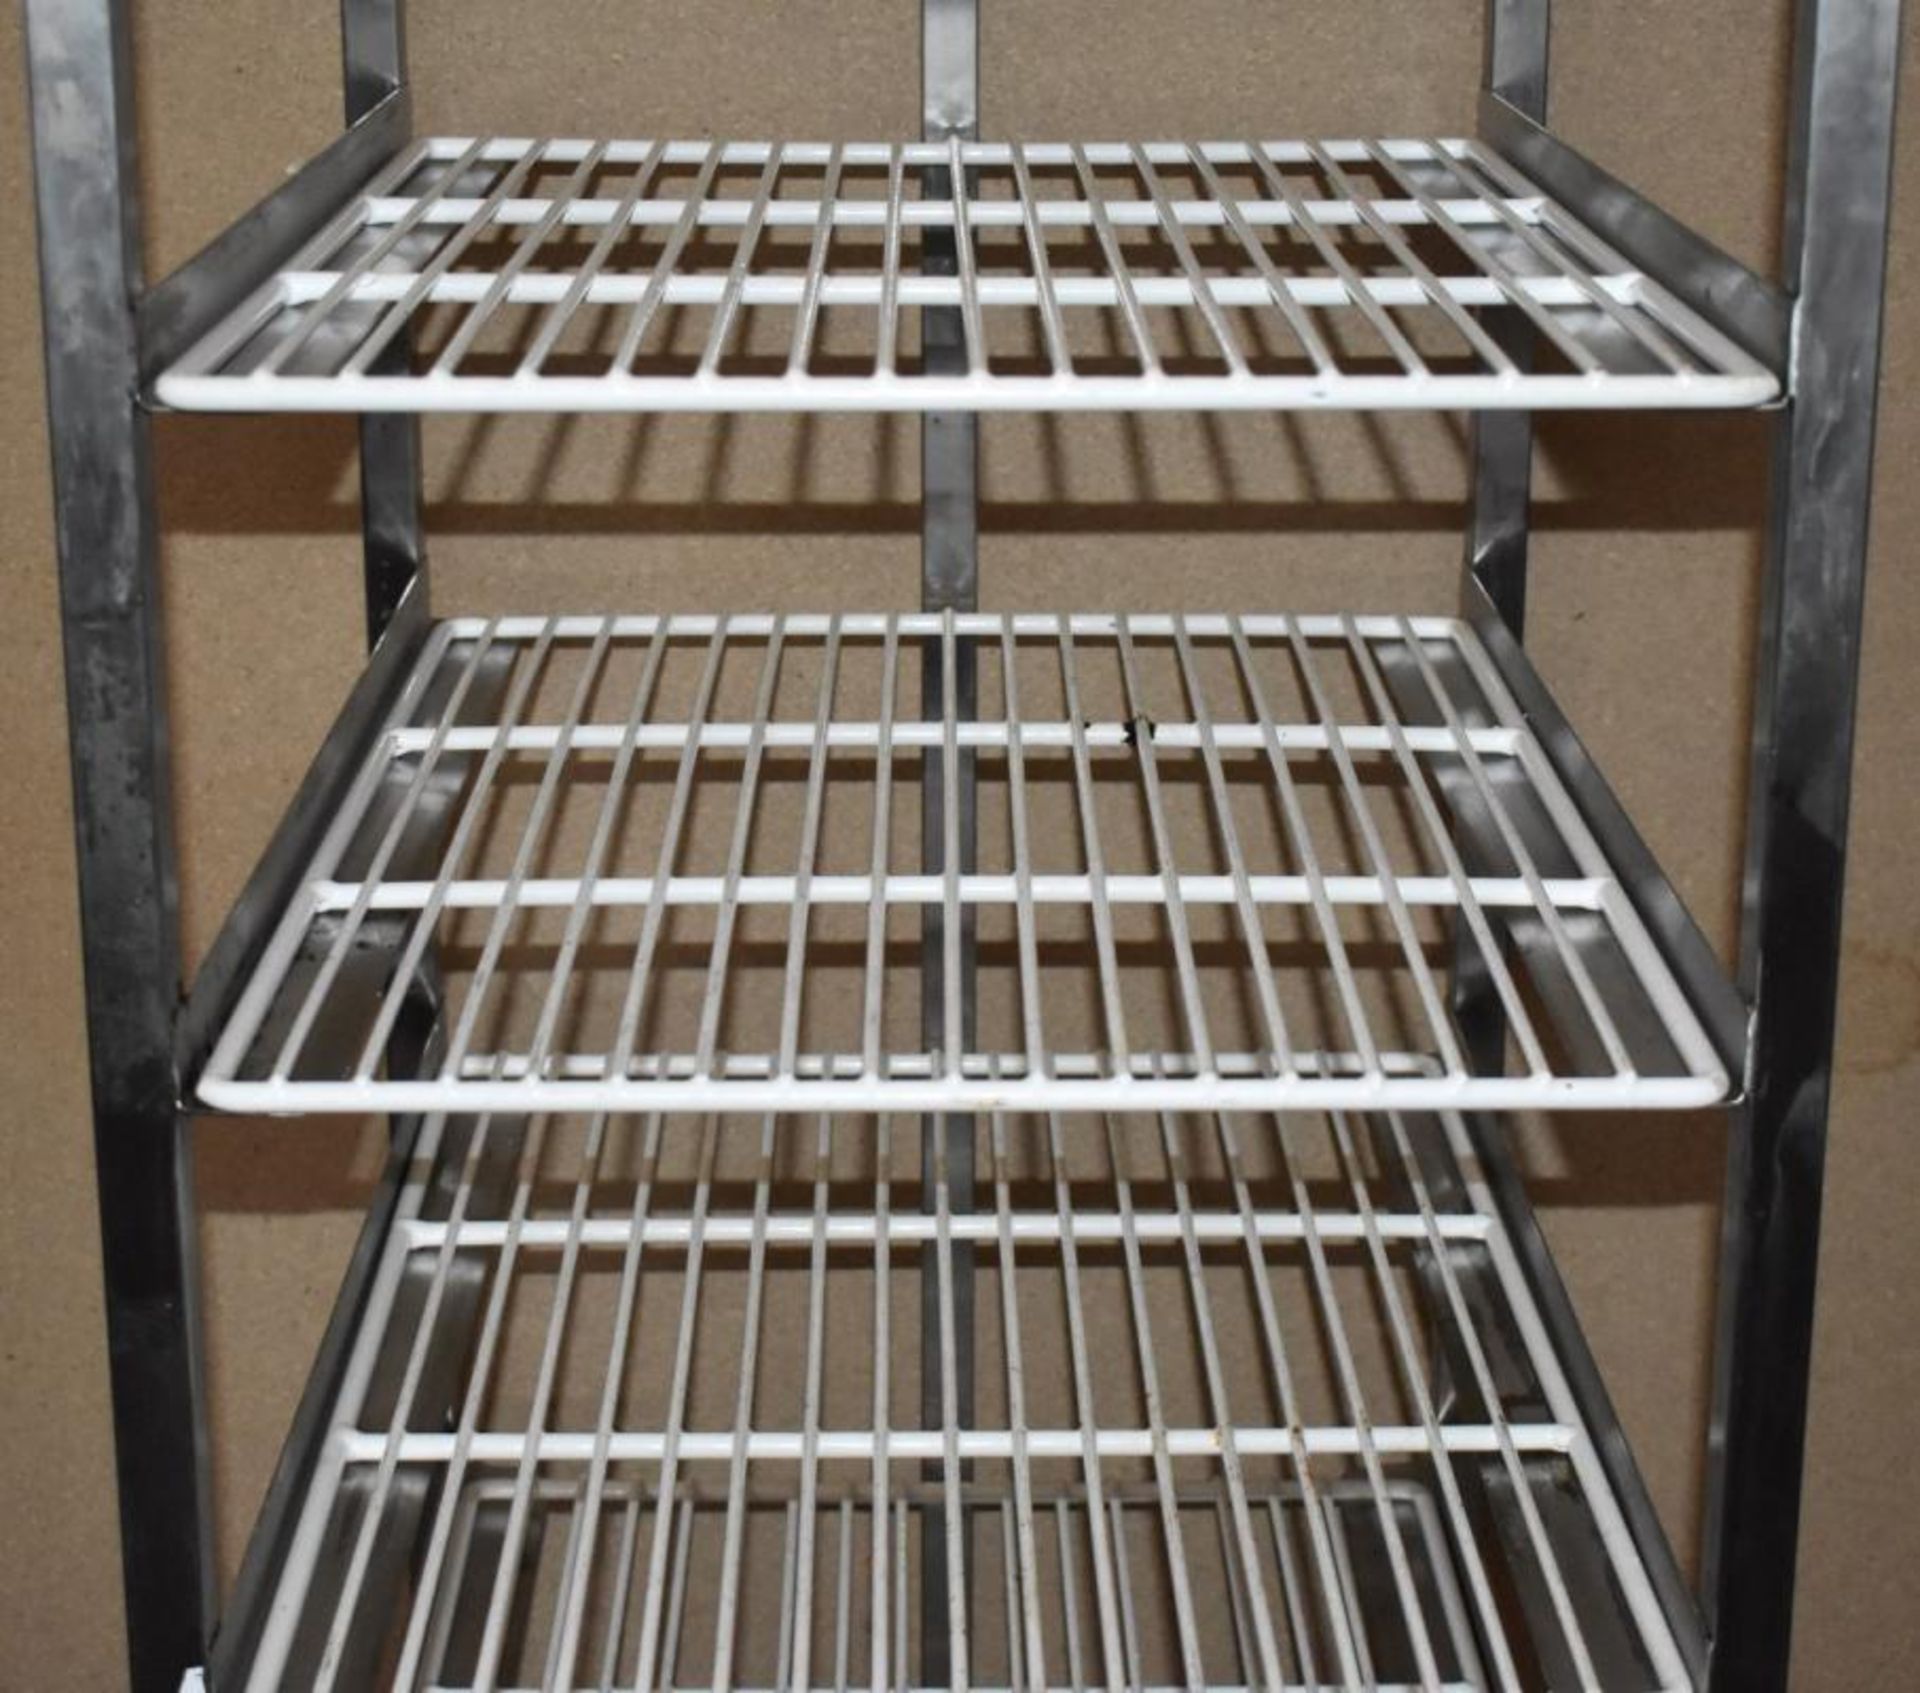 1 x Stainless Steel 8 Tier Mobile Shelf Unit For Commercial Kitchens With White Coated Wire Shelves - Image 8 of 11